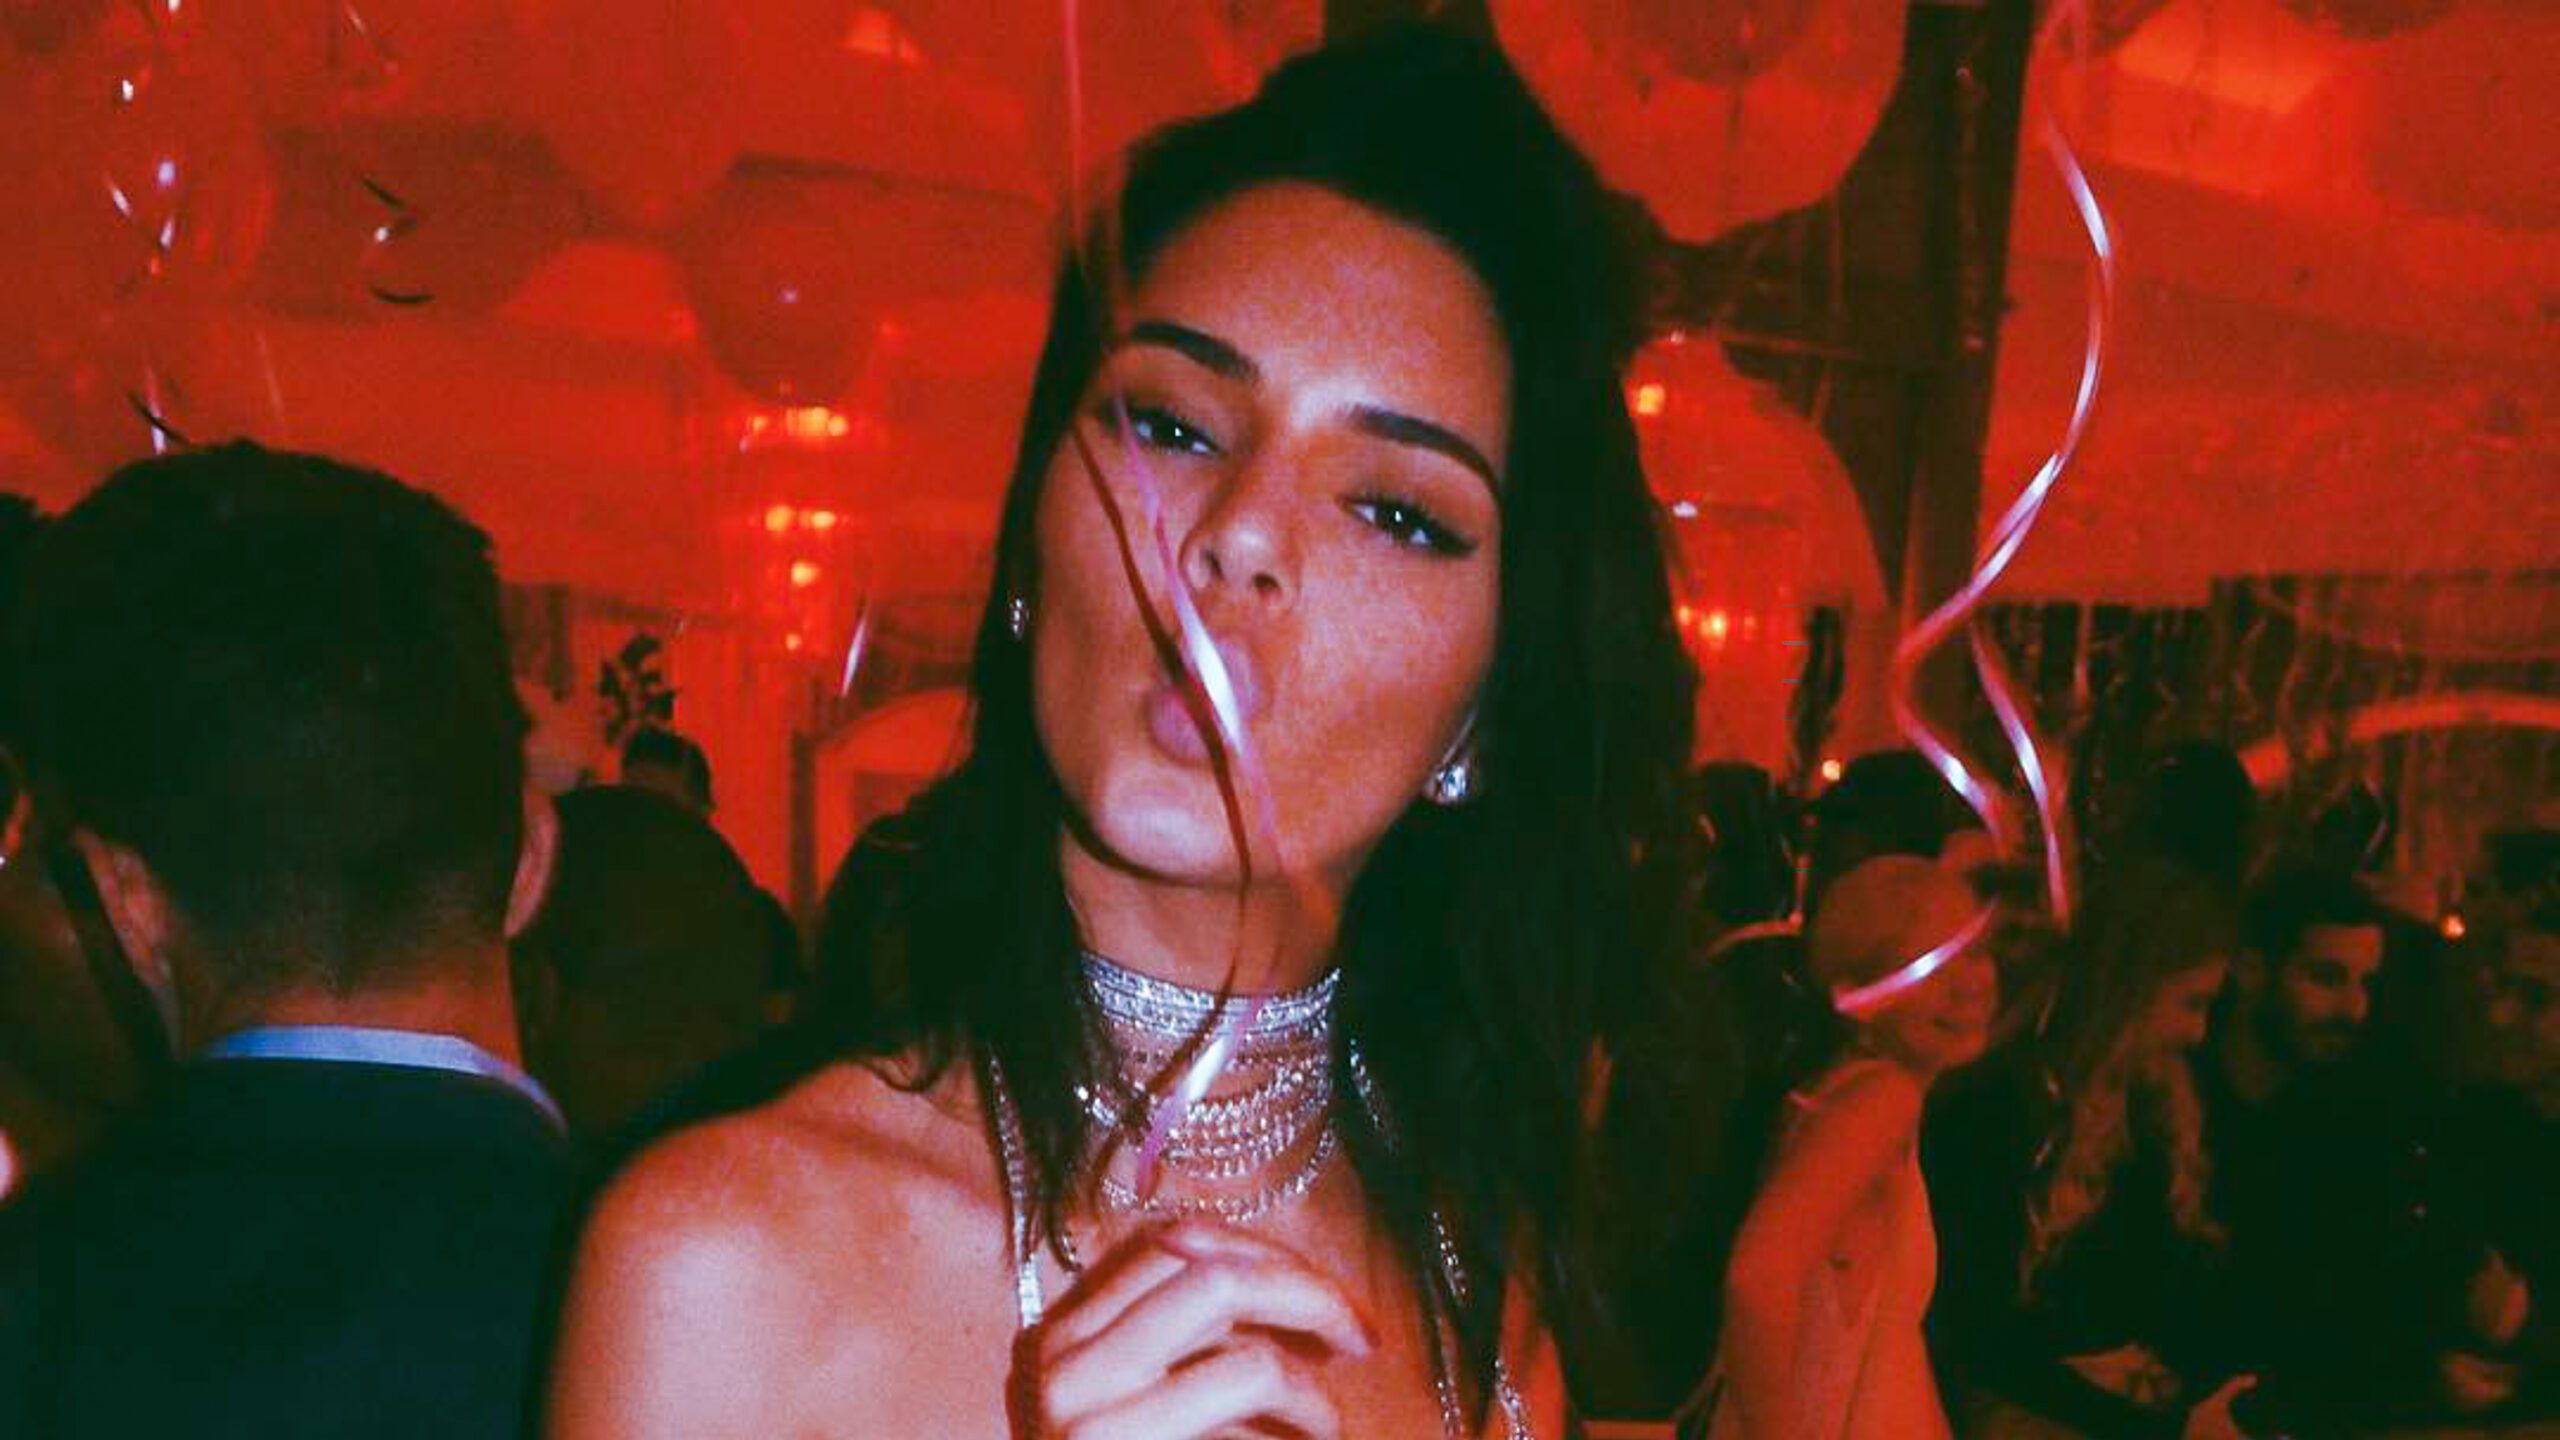 IN PHOTOS: Kendall Jenner’s 21st birthday bash